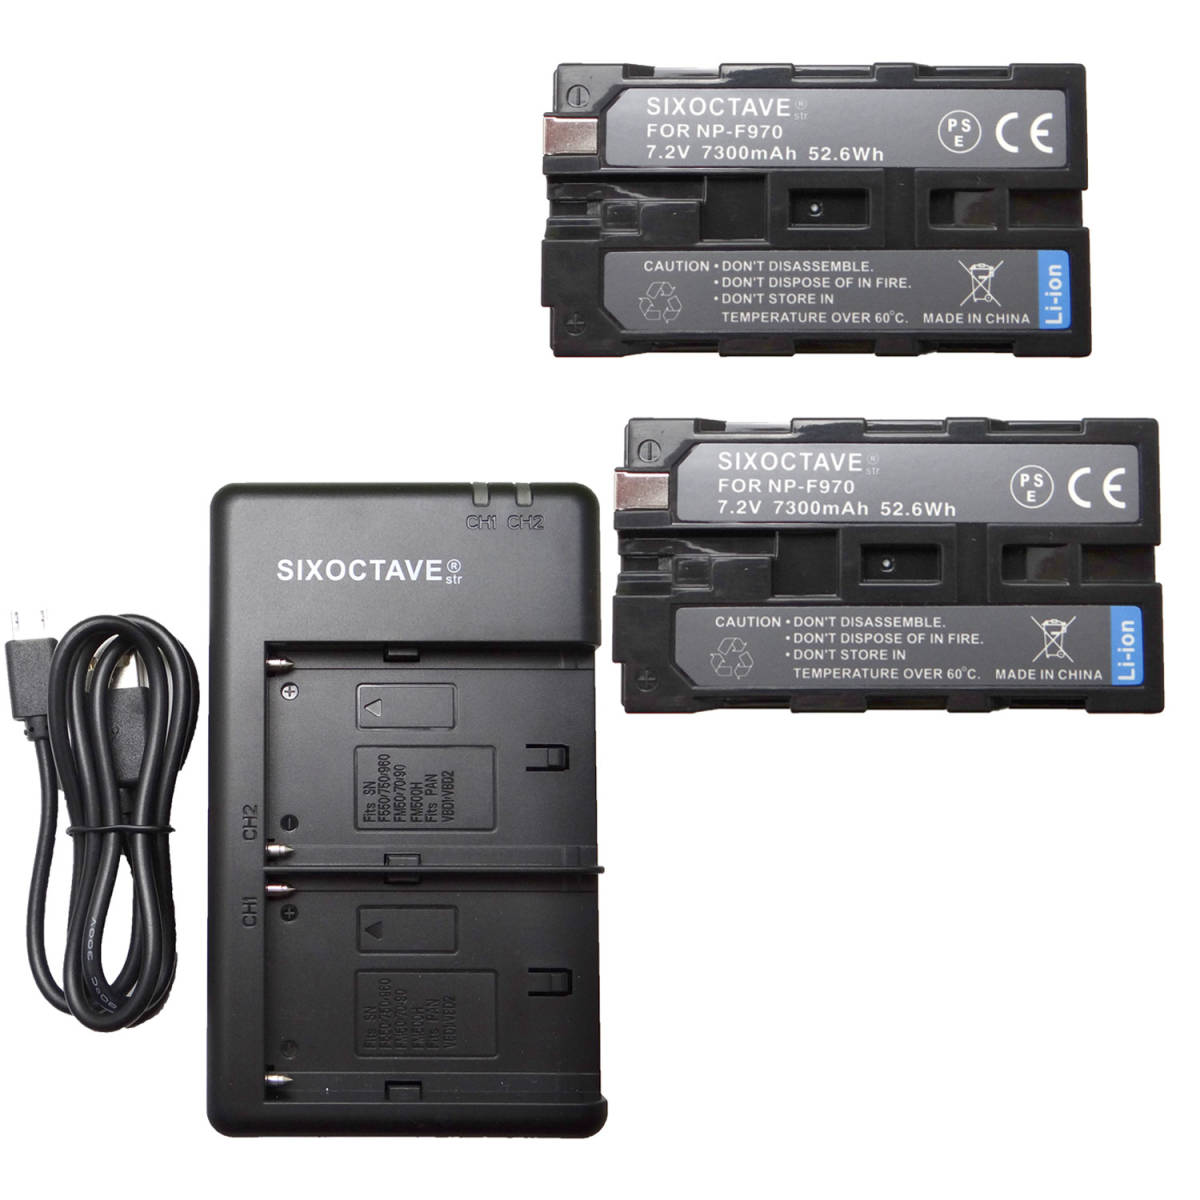  Sony NP-F970 NP-F960 NP-F950 interchangeable battery 2 piece & dual charger BC-VM10. 3 point set HXR-NX5J/HDR-AX2000/HDR-FX7/HDR-FX1000/FDR-AX1